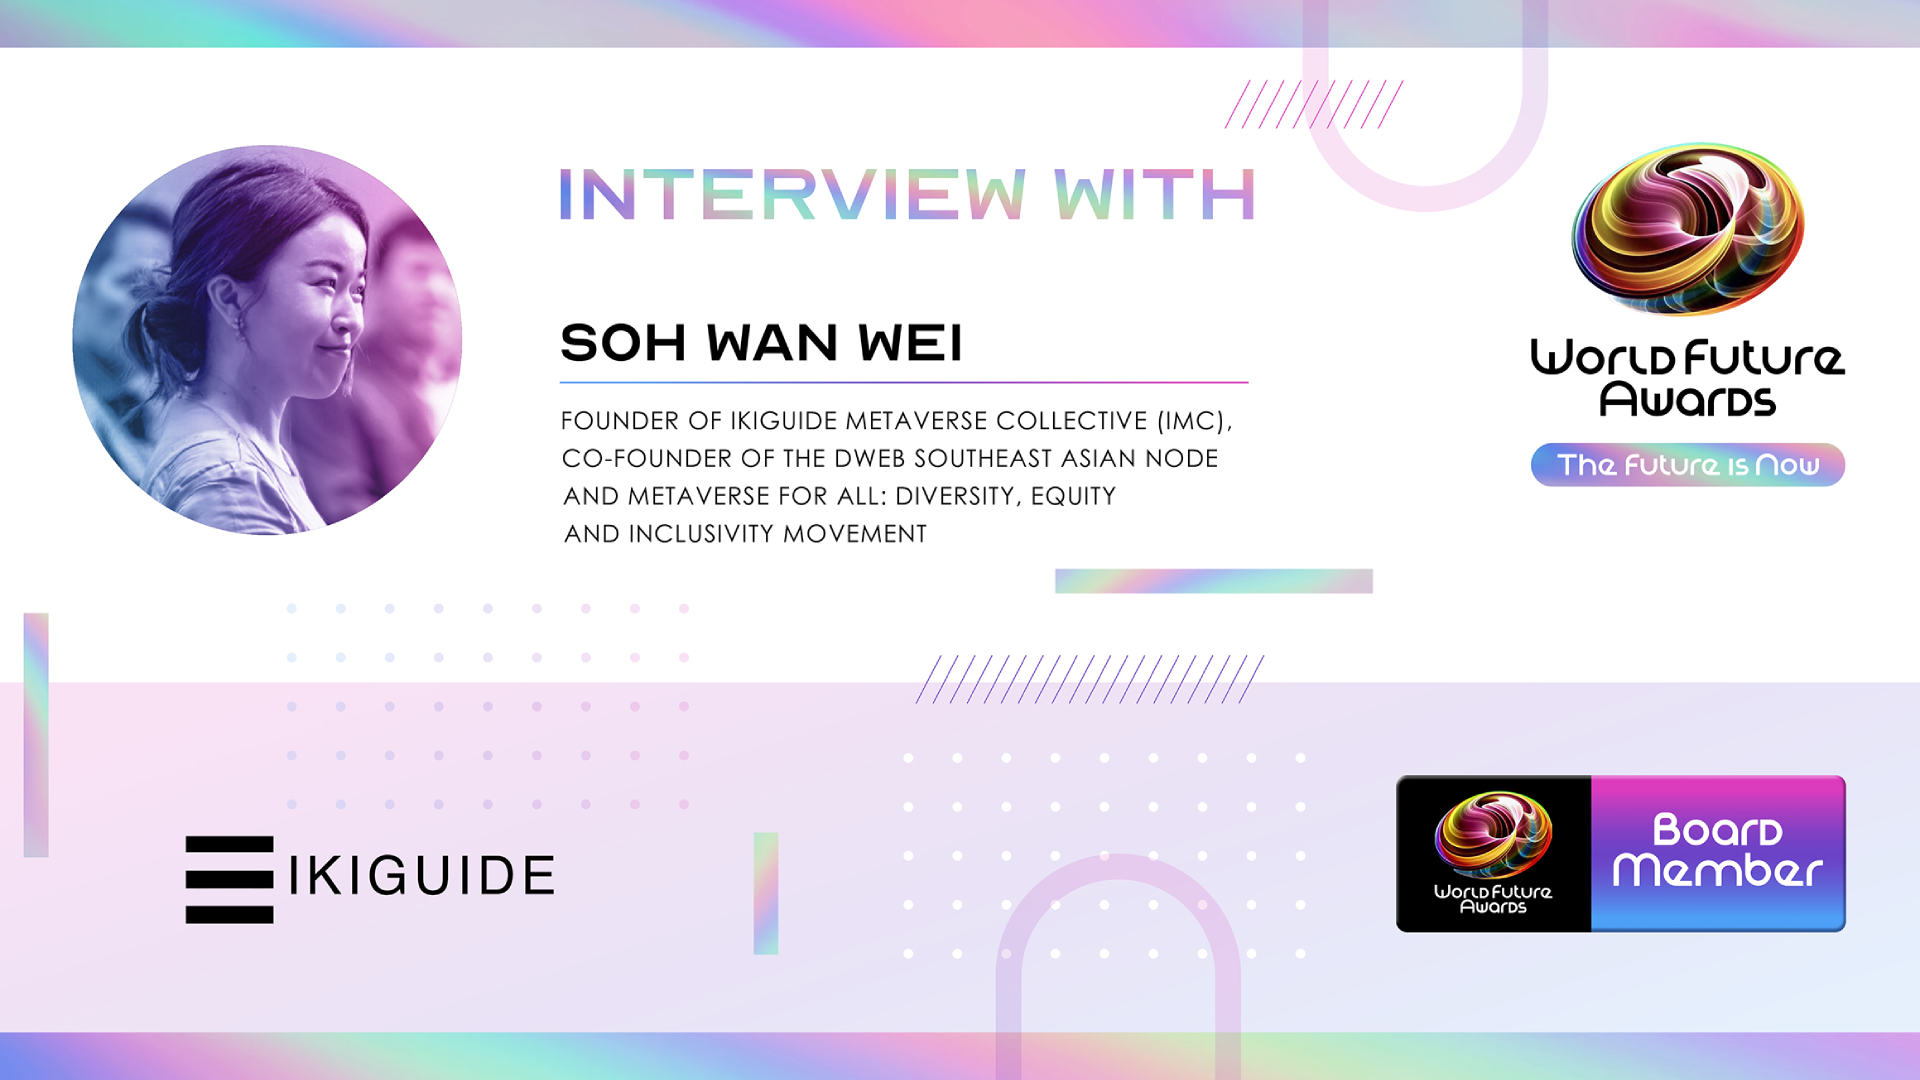 Interview with Soh Wan Wei, the World Future Awards Board Member